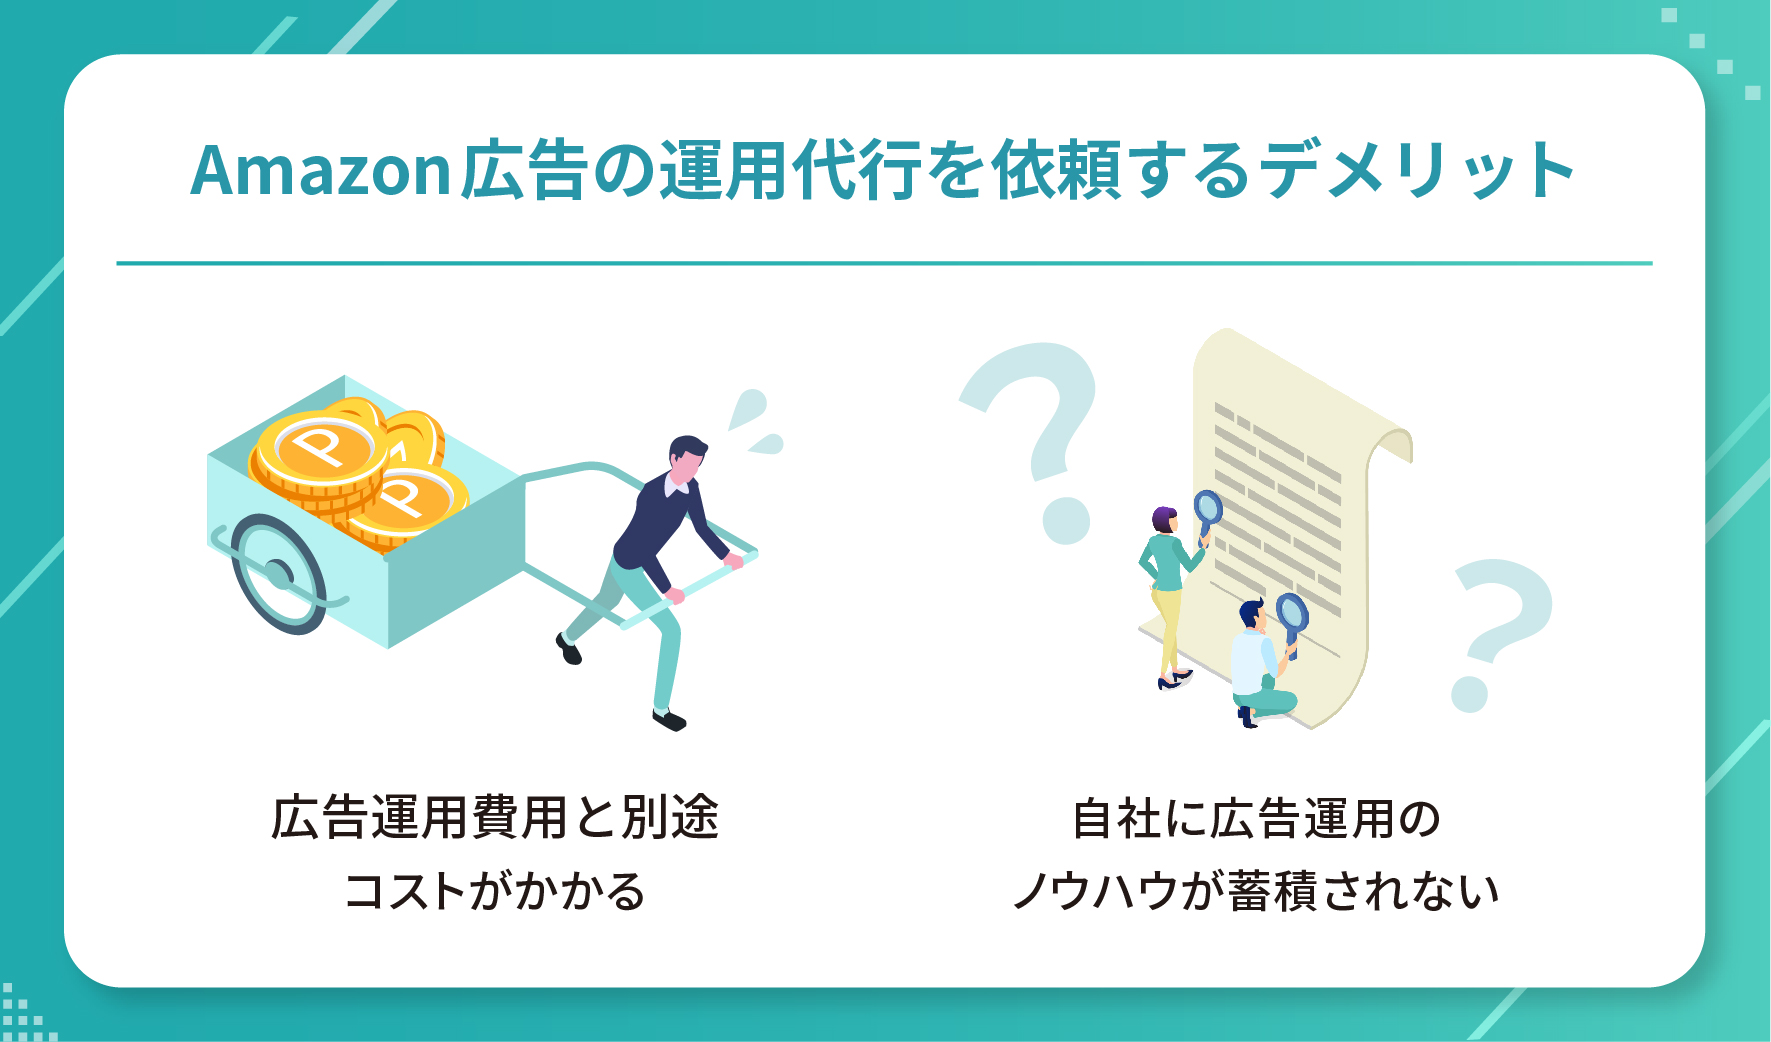 Amazon広告の運用代行を依頼するデメリット